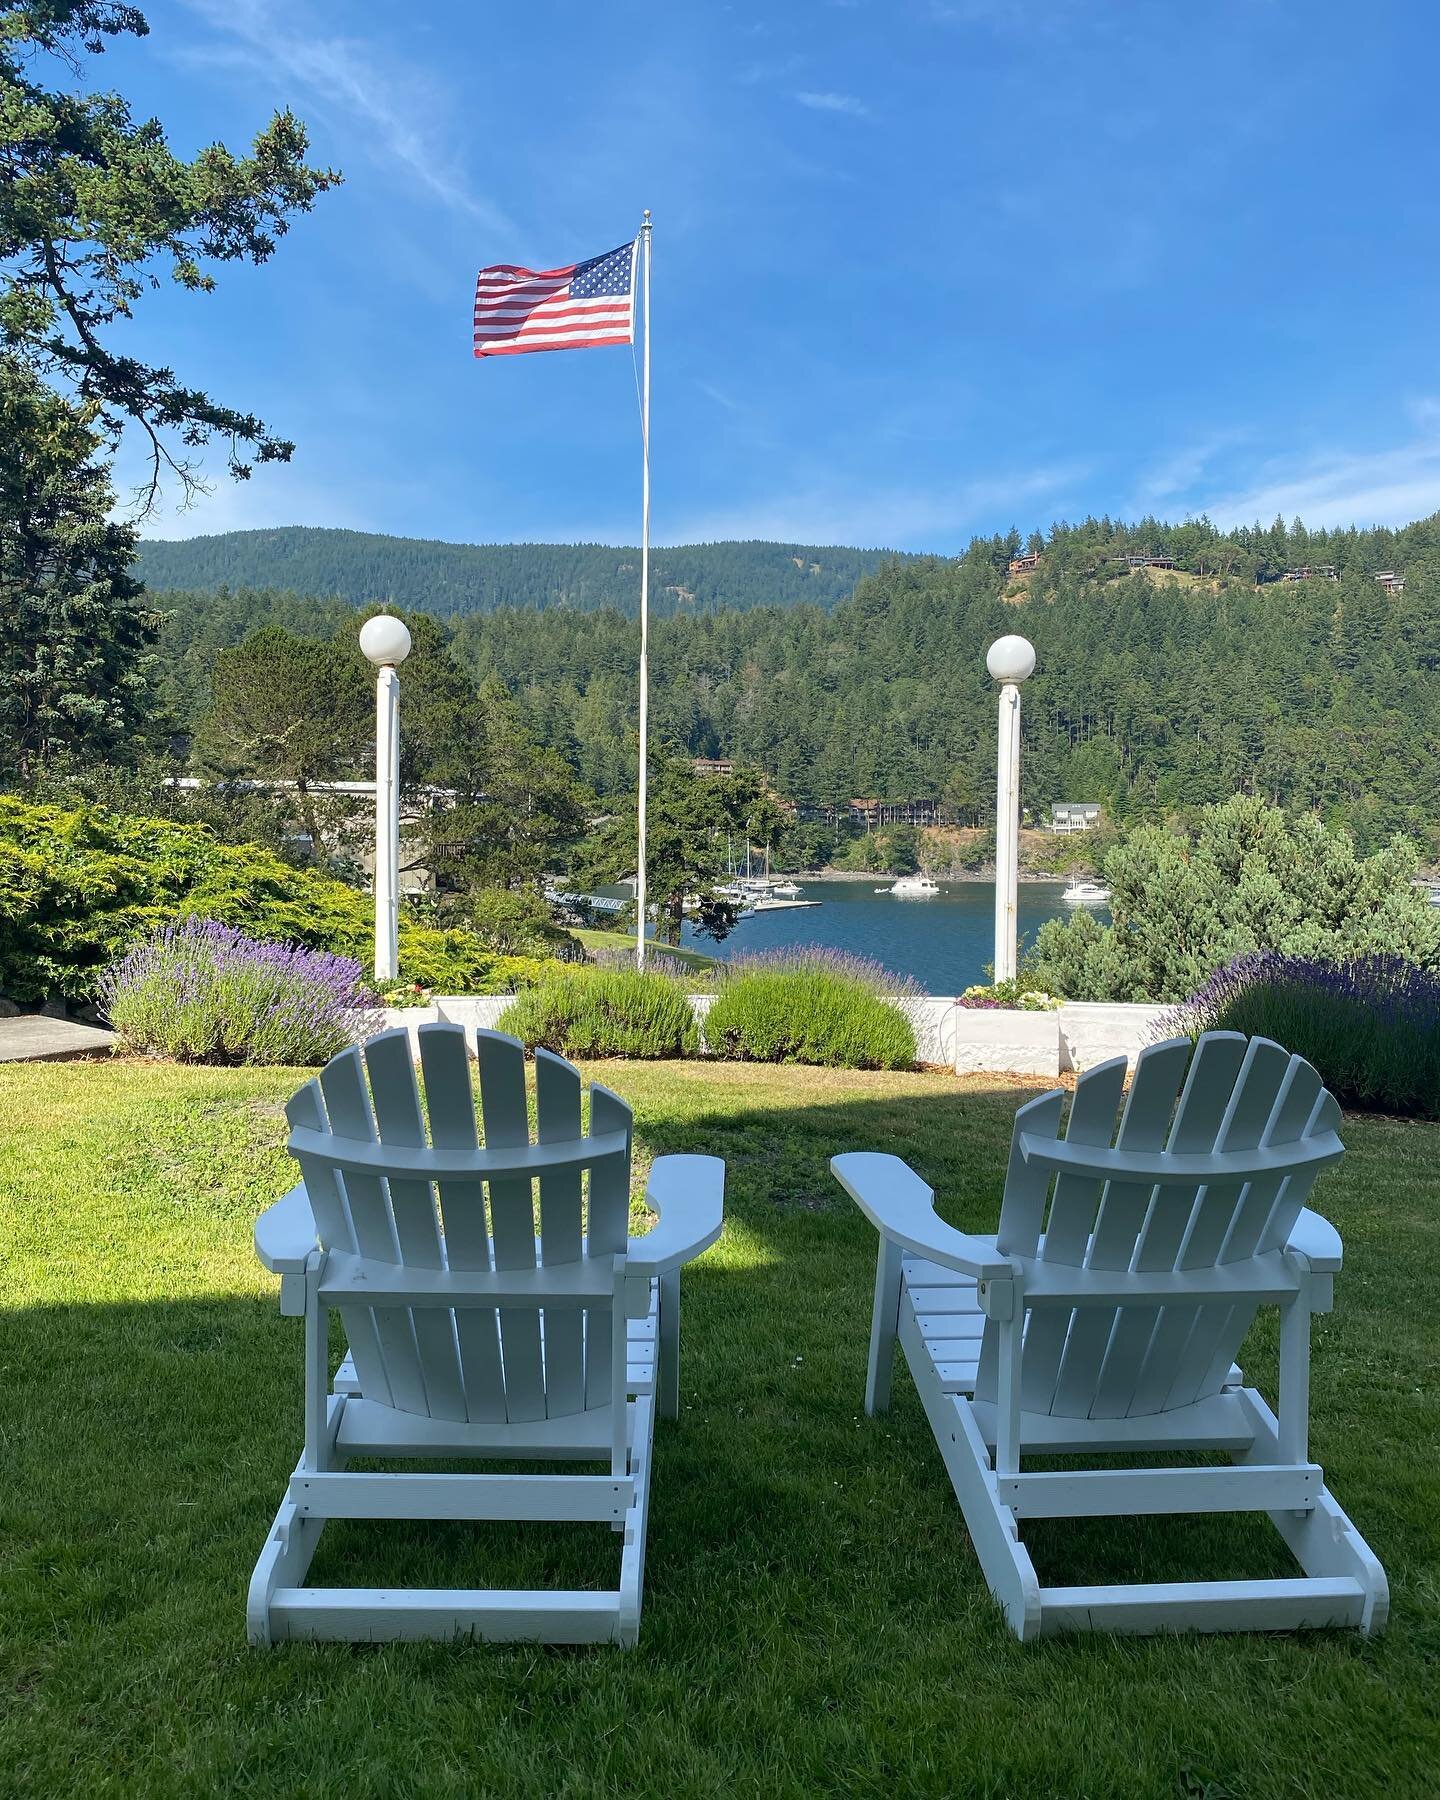 Happy 4th of July from all of us at Rosario!  #rosarioresort #orcasisland #4thofjuly